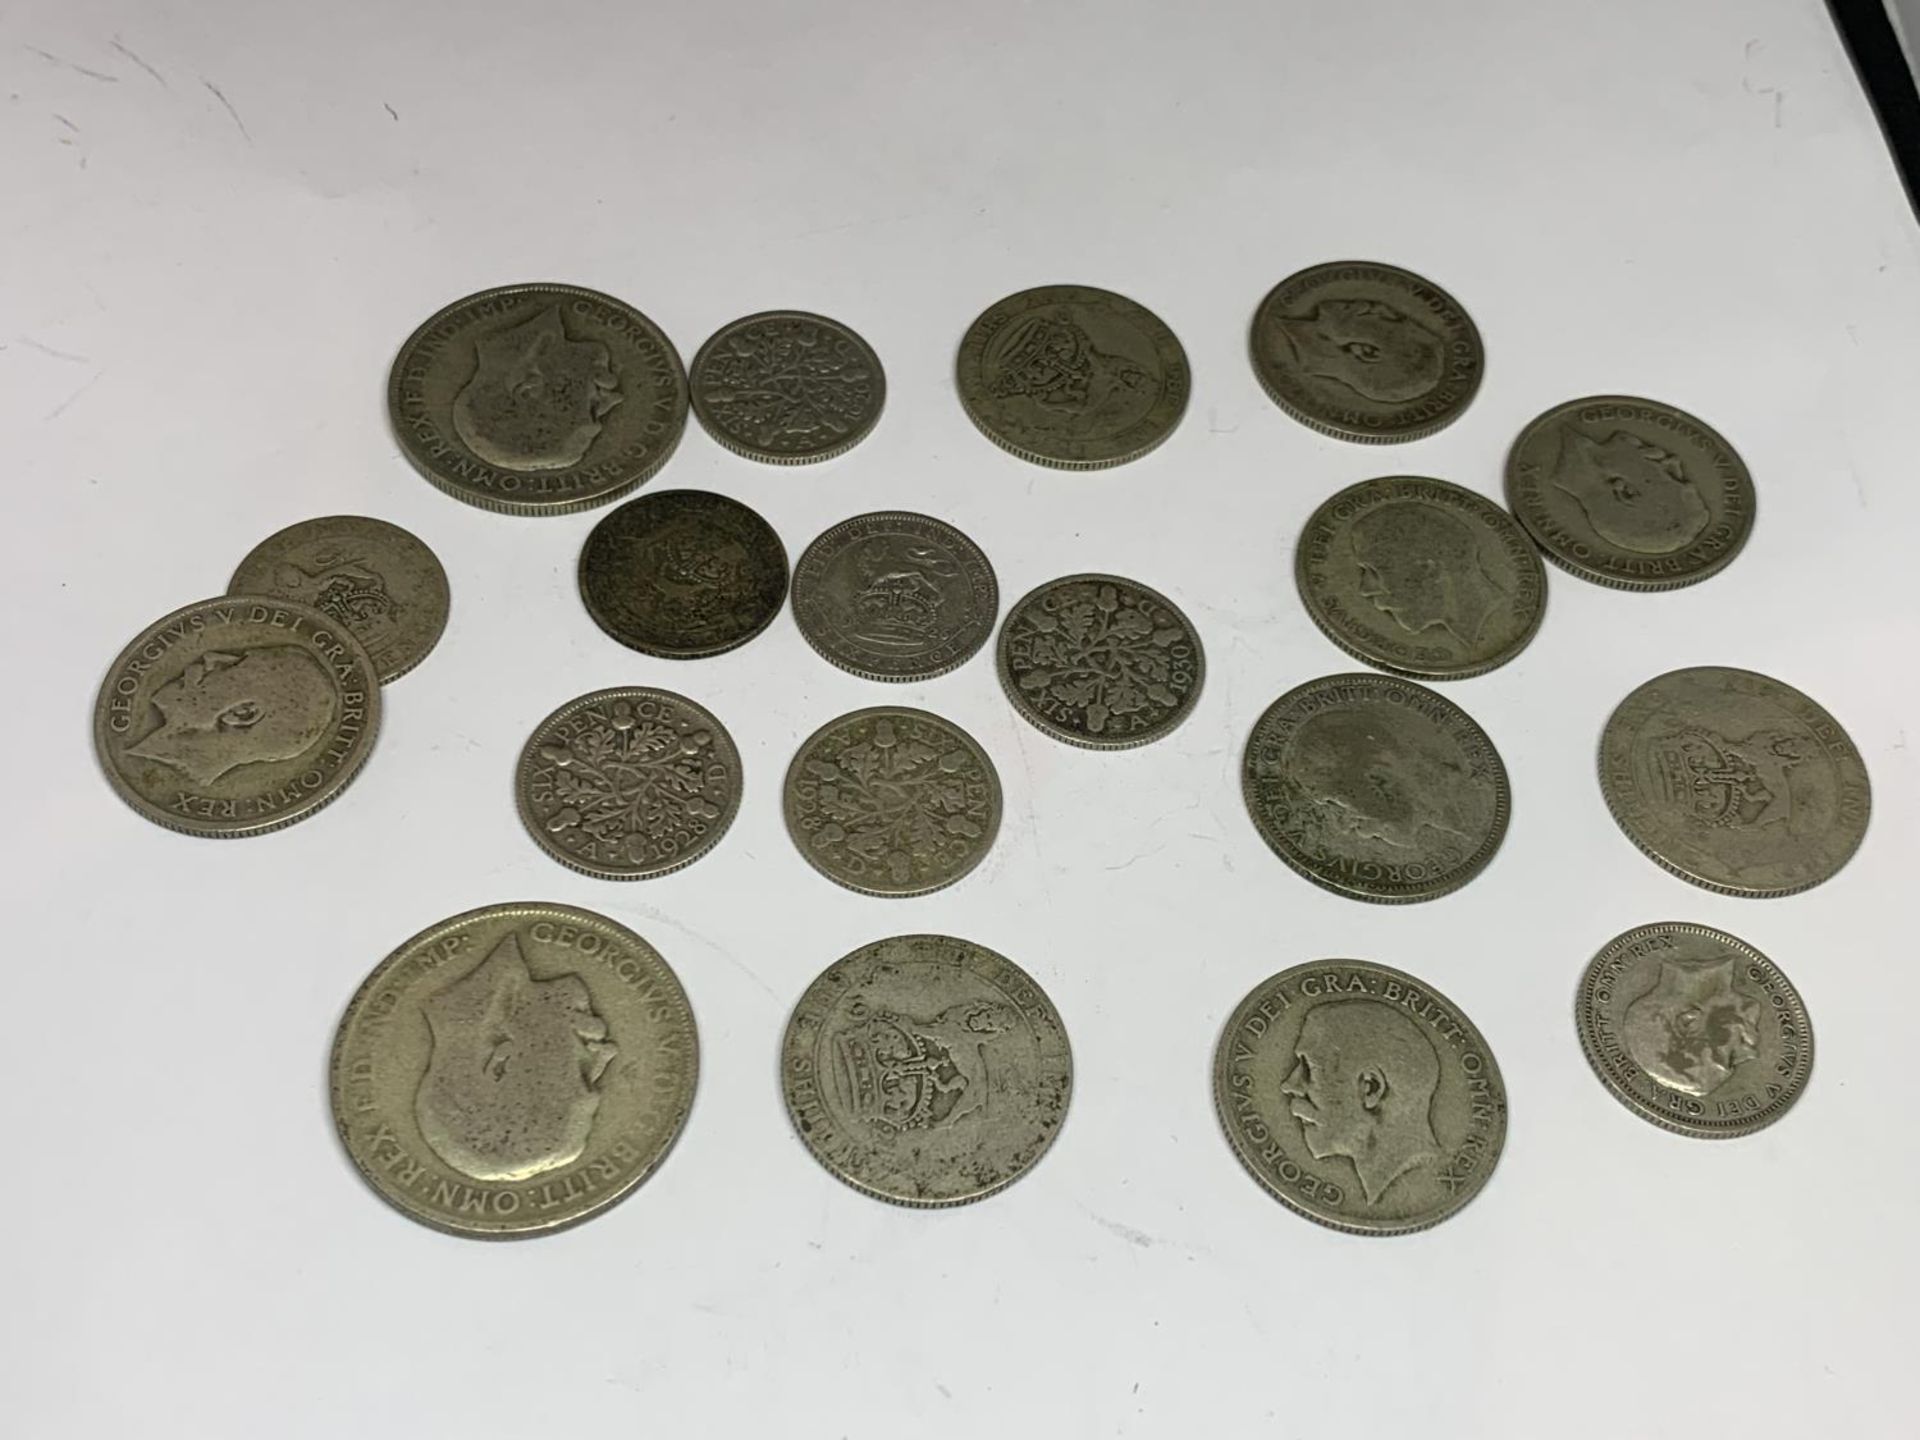 NINETEEN SILVER COINS